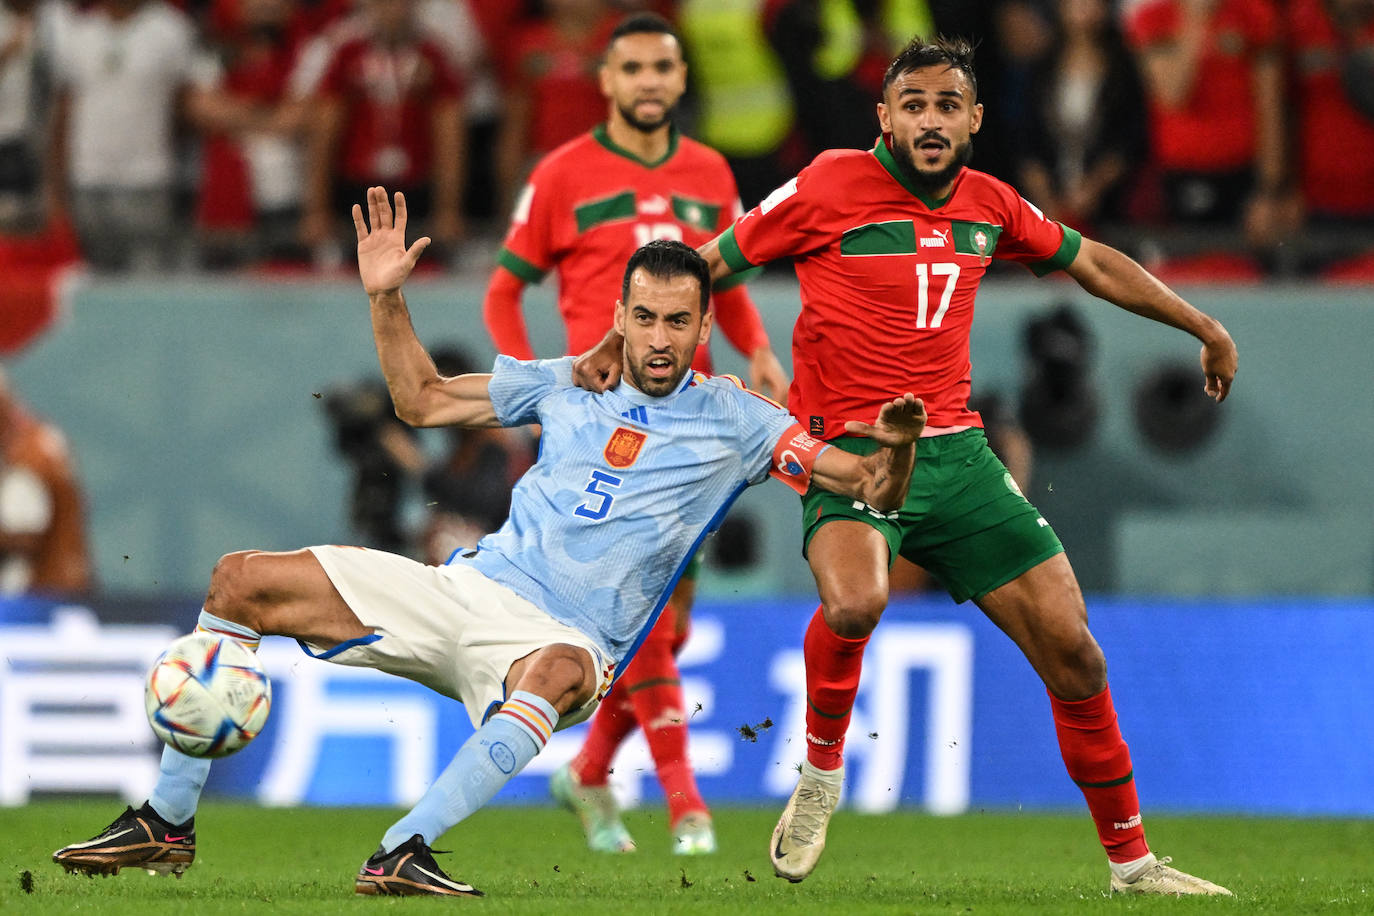 La Roja lost to Morocco on penalties in their quarter-final this Tuesday.